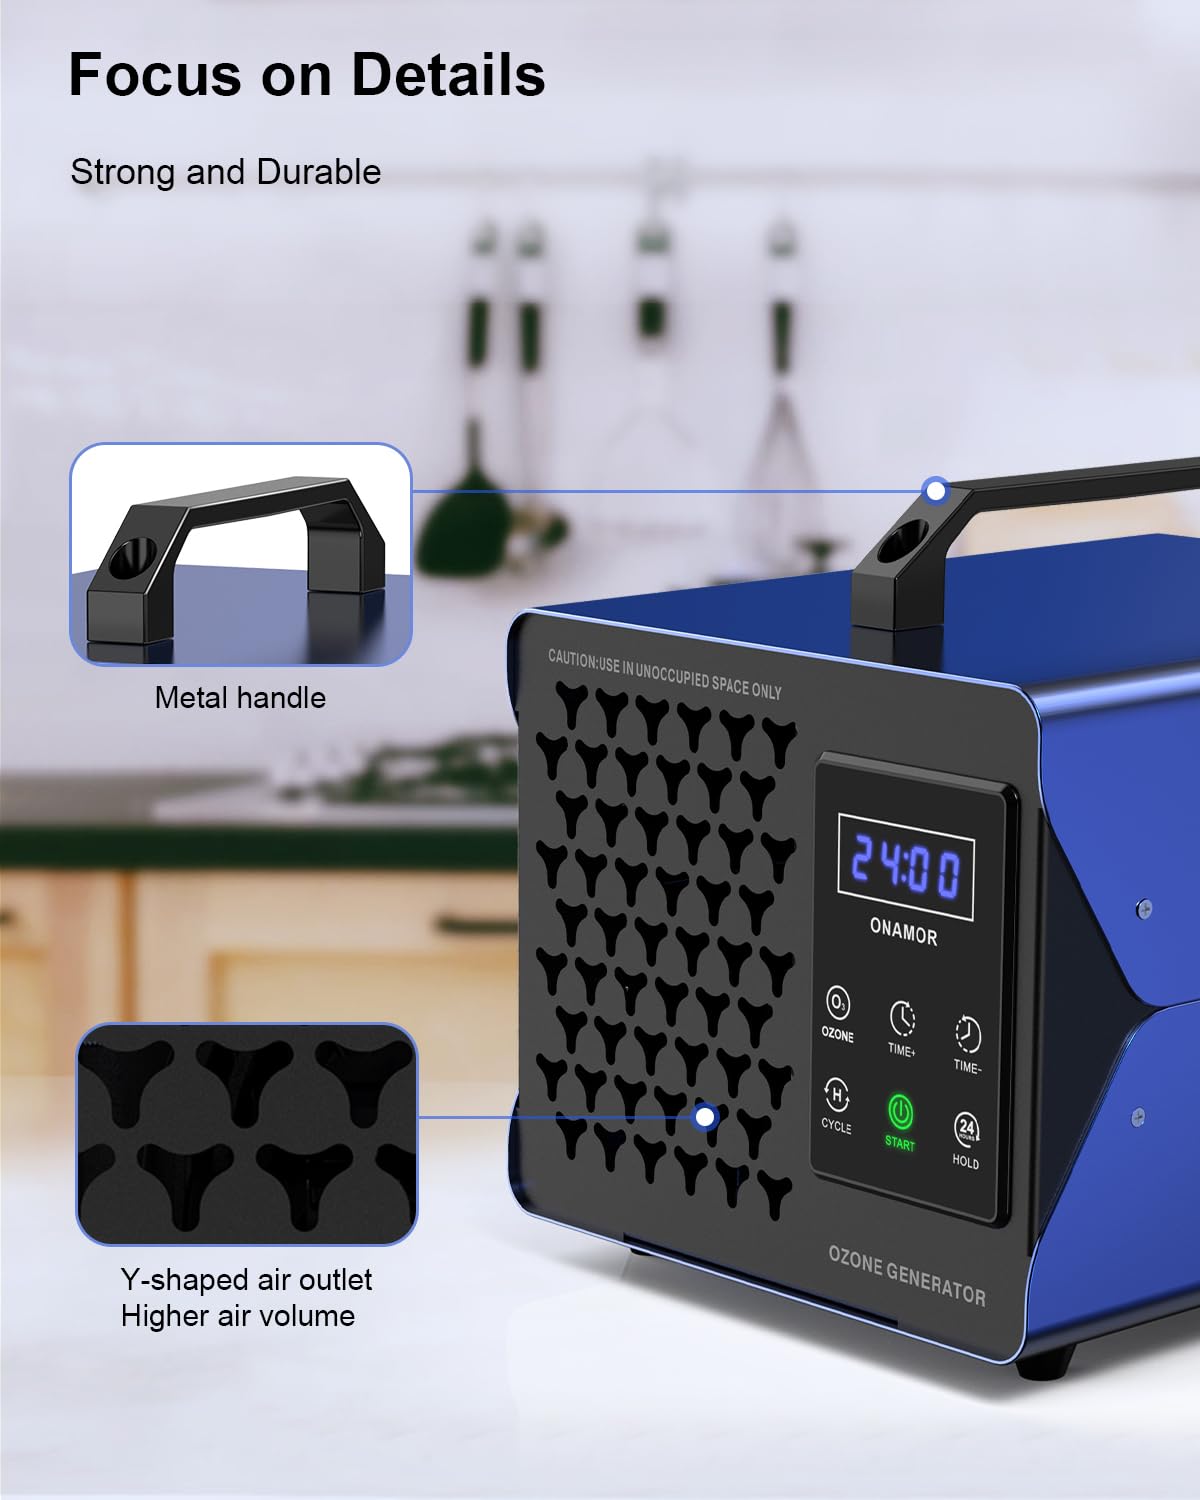 Bundle | Ozone Generator 15000mg/h and Digital Ozone Generator 30000mg/h - Ozone Machine Ionizer & O3 Deodorizer for Home, Smoke, and Pet Room. (Eliminating Odor Areas up to 2000-4000 Square Feet)